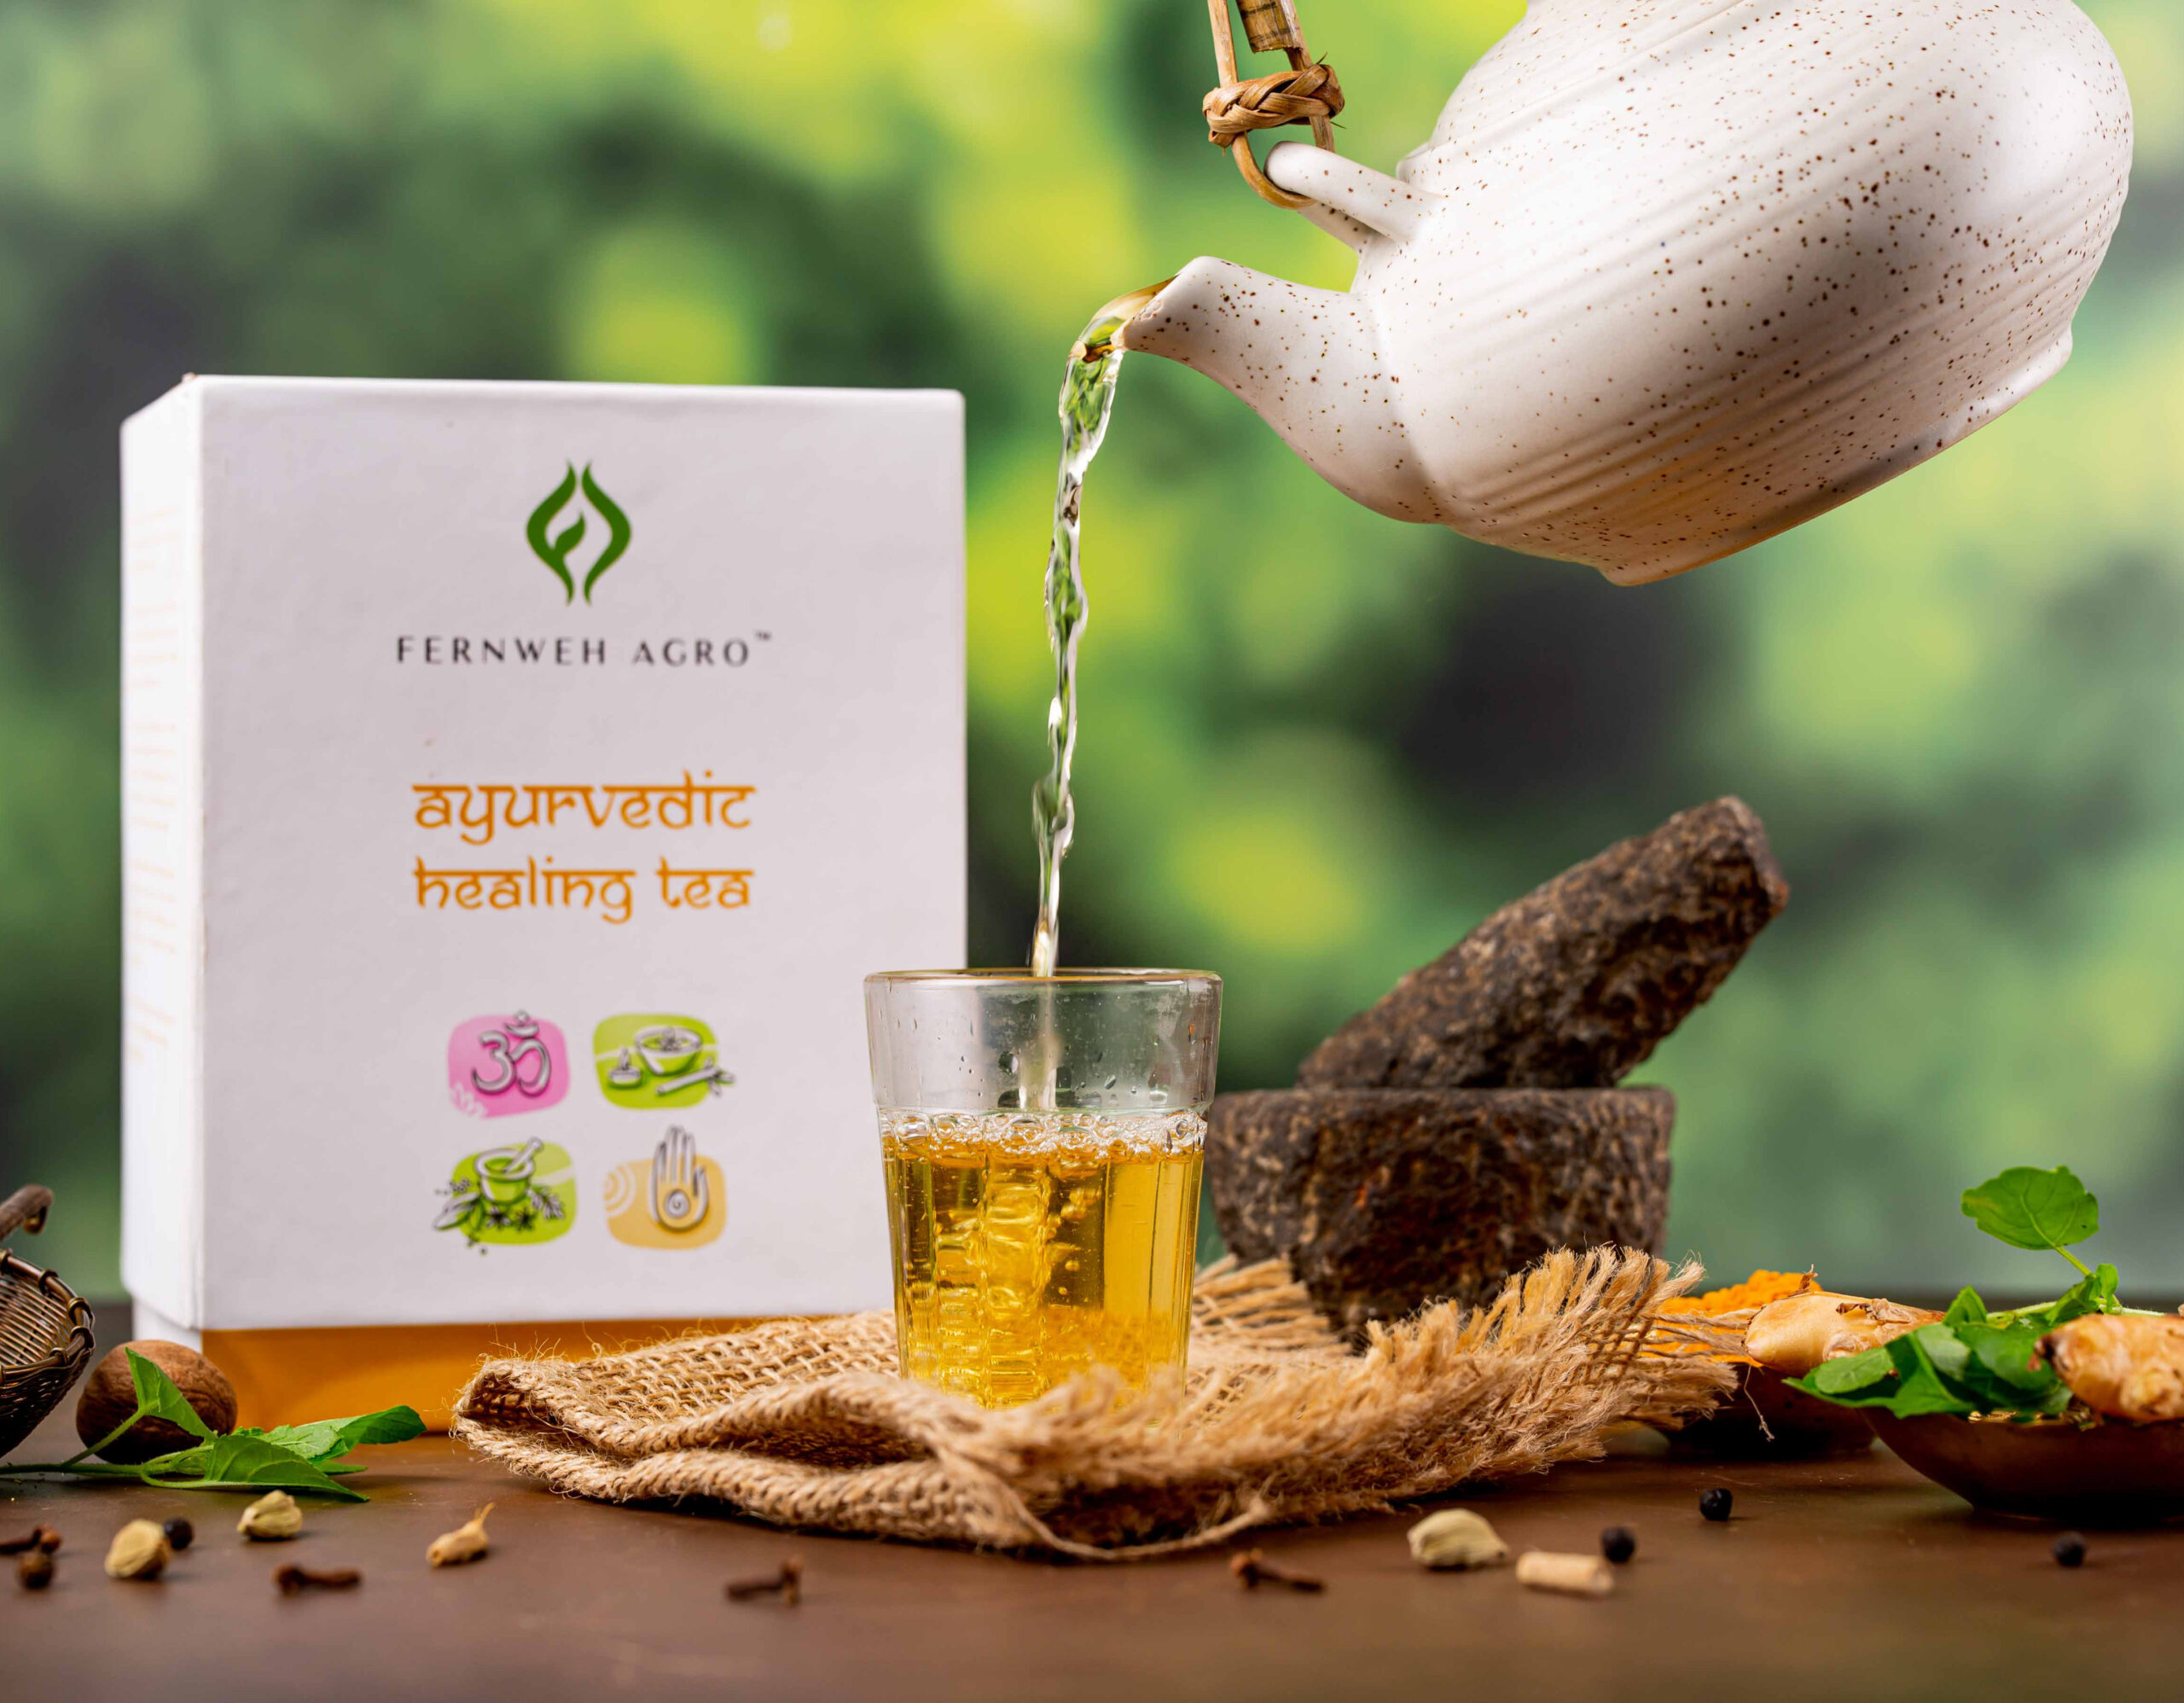 Fernweh Agro Ayurvedic Healing Green Tea exhibits the health-benefit aesthetics of Ayurveda culture. The herbal infusion surrounding the tea includes turmeric, black pepper, ashwagandha, rooibos, clove, ginger, tulsi, liquorice, and organic green tea. It is a remedial beverage that profiles piquant but soothing notes, spicy-citrusy aroma with mild pungent undertones, and radiant Tuscany visuals. This tea heightens the immunity defence to alleviate overall health wellness.